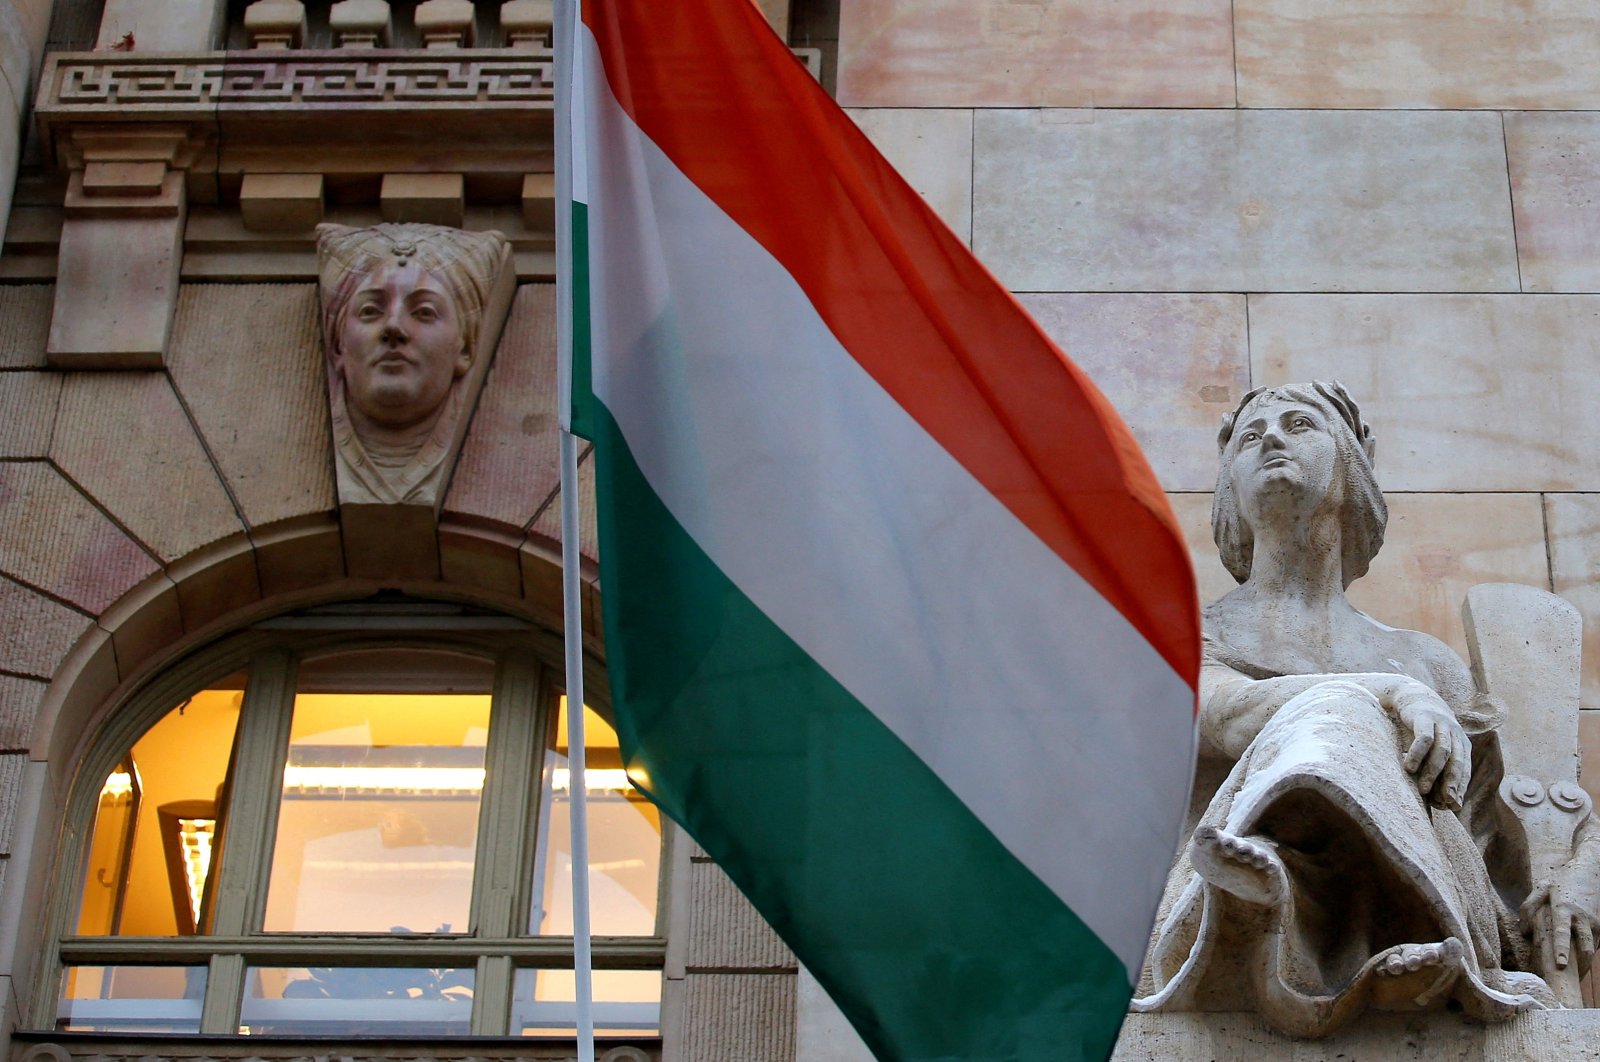 The Hungarian national flag flies on the building of the National Bank of Hungary in Budapest, Hungary, Jan. 10, 2013. (Reuters Photo)